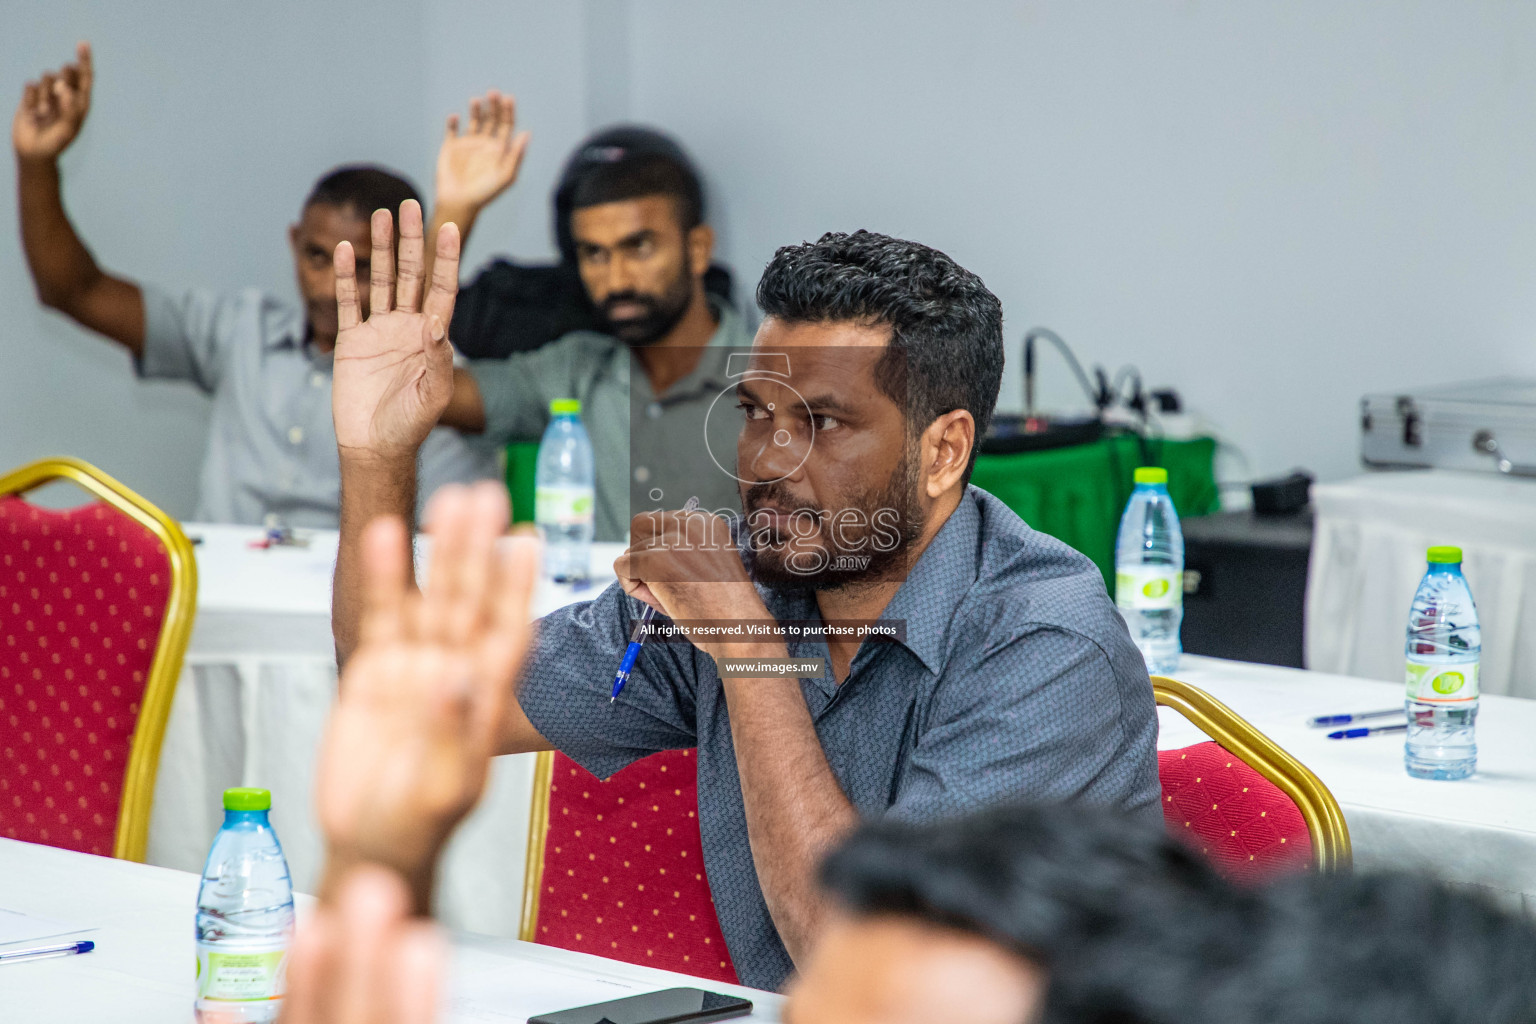 Annual general meeting of Athletics association of maldives held in 18th April 2022 photos by Nausham Waheed